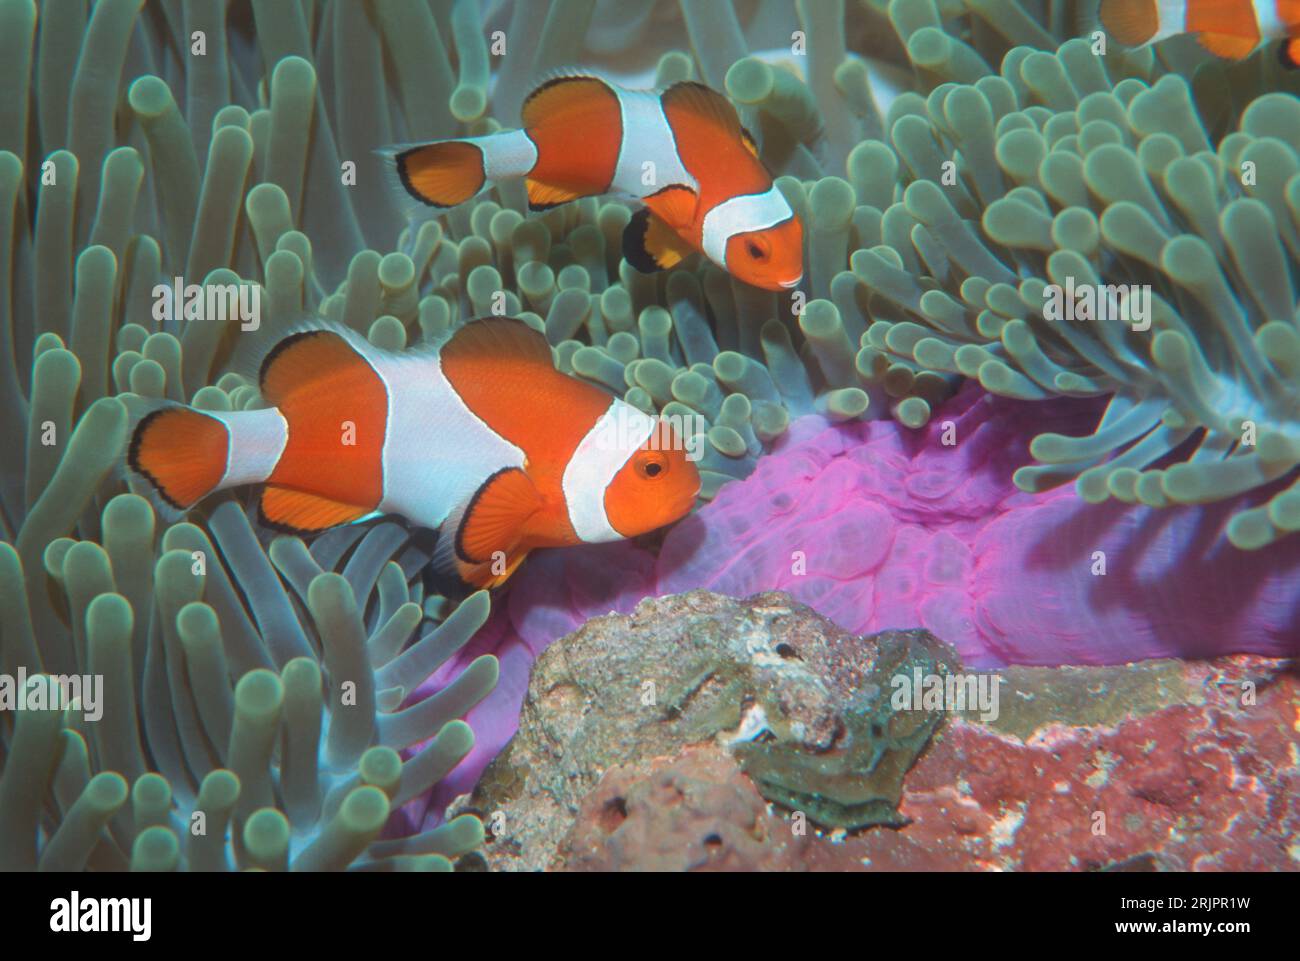 False clown anemonefish [Amphiprion ocellaris] male and female, clearing base of anemone prior to egg laying.  Raja Ampat, West Papua. Stock Photo